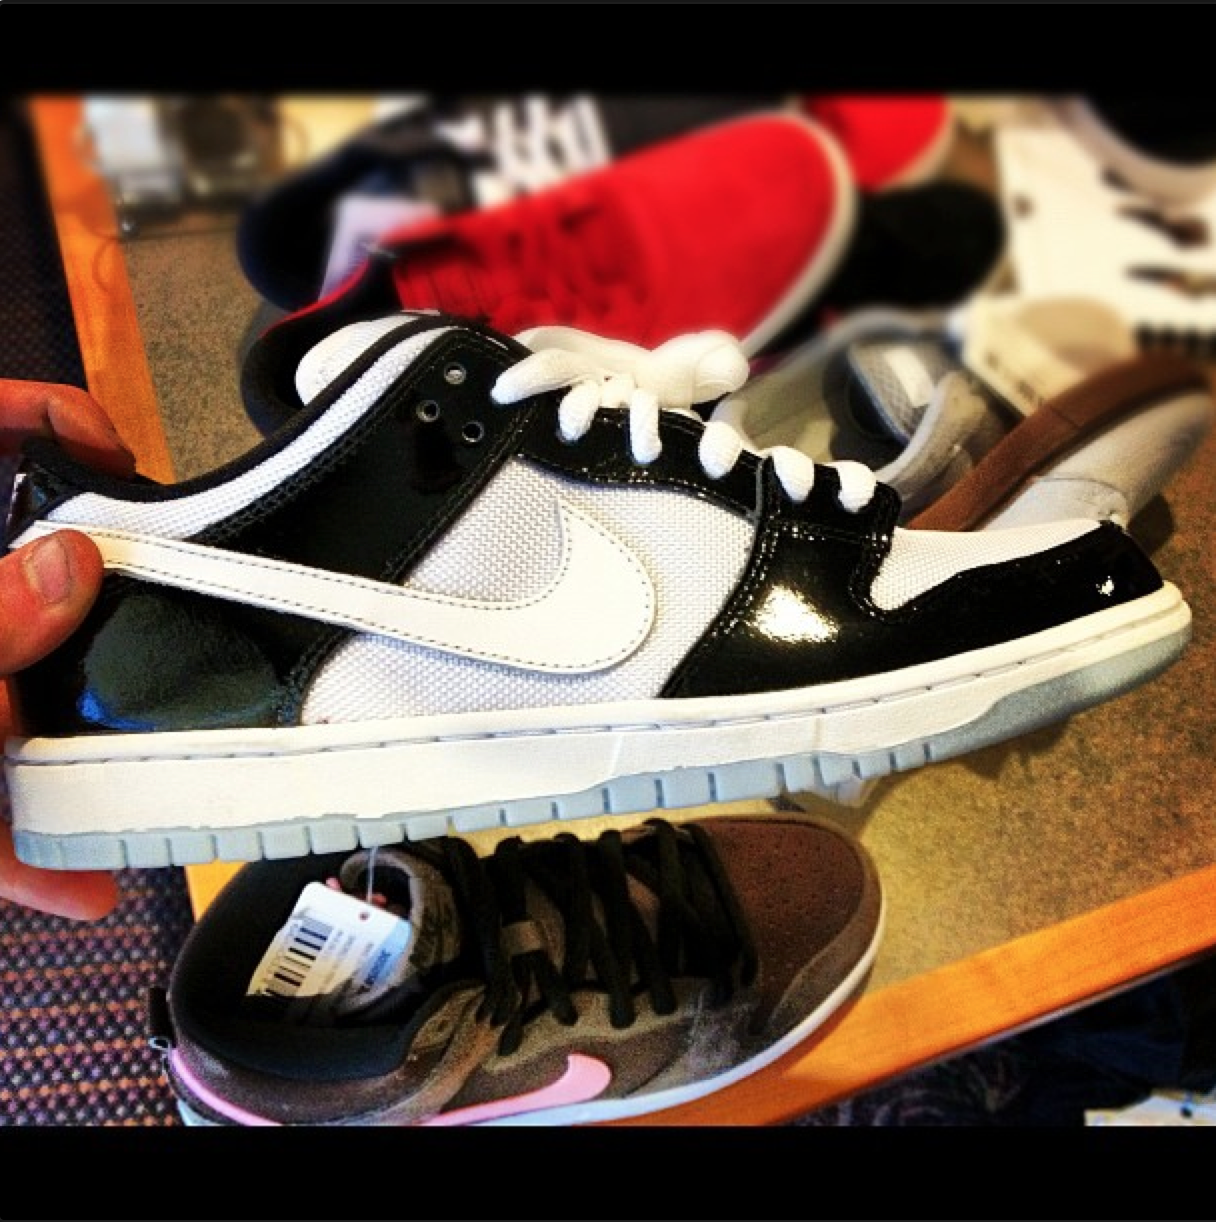 Brooklyn Projects x Nike SB Dunk Low ‘Concord’ – New Images